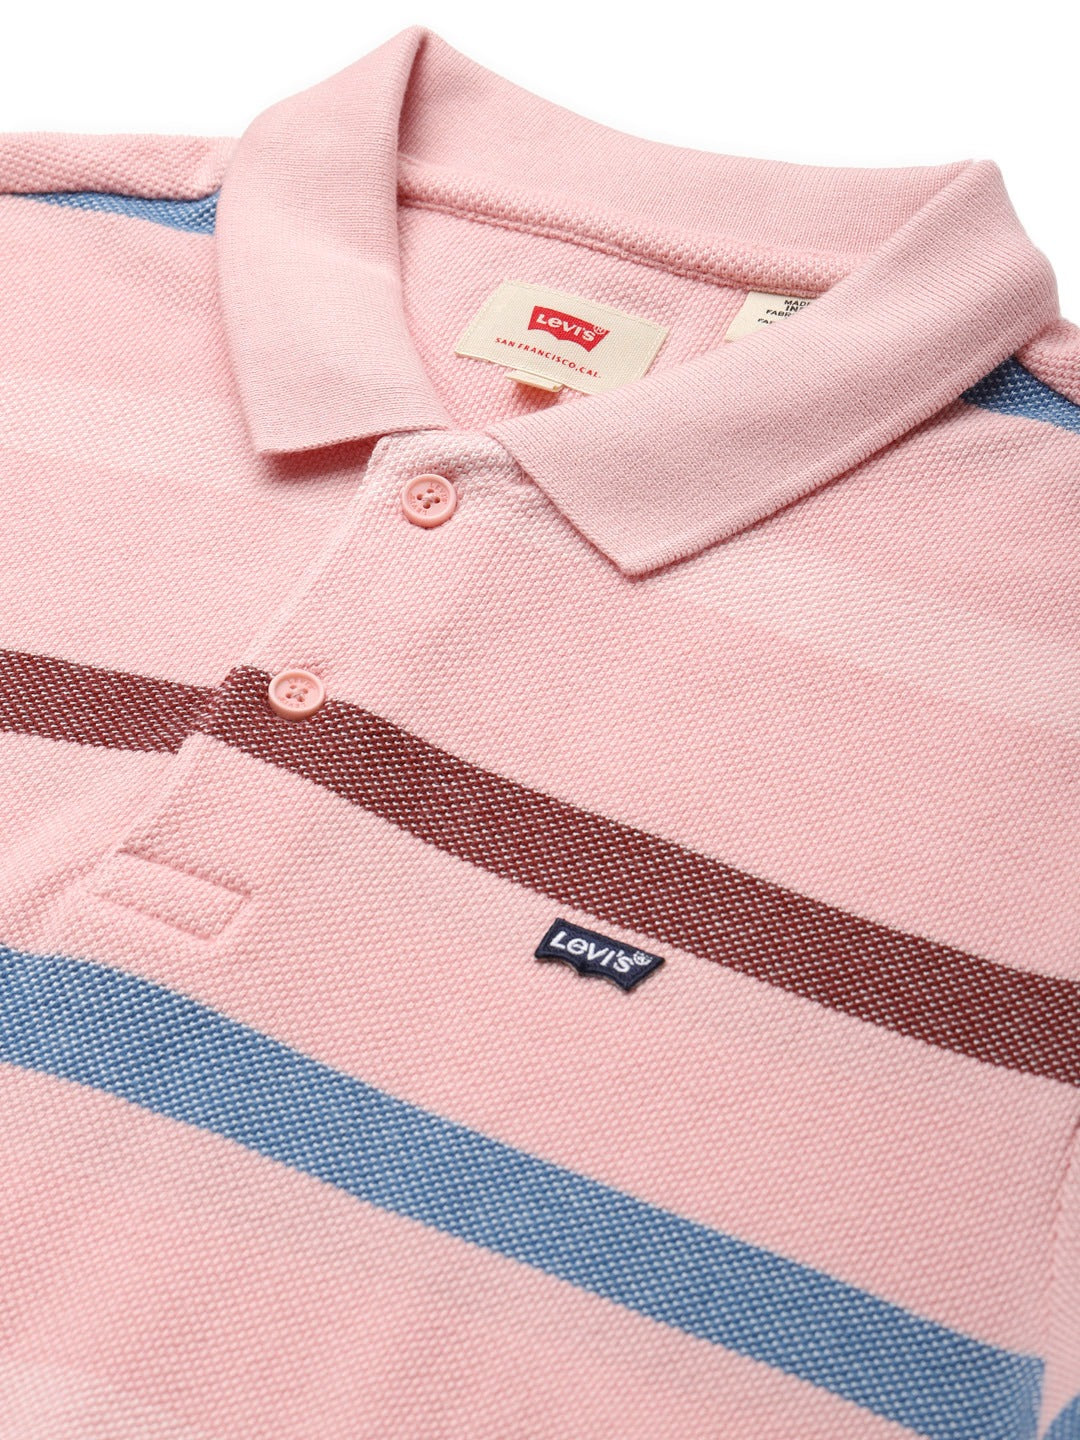 Men Pink & Brown Pure Cotton Striped Polo Collar T-shirt-17474-0189